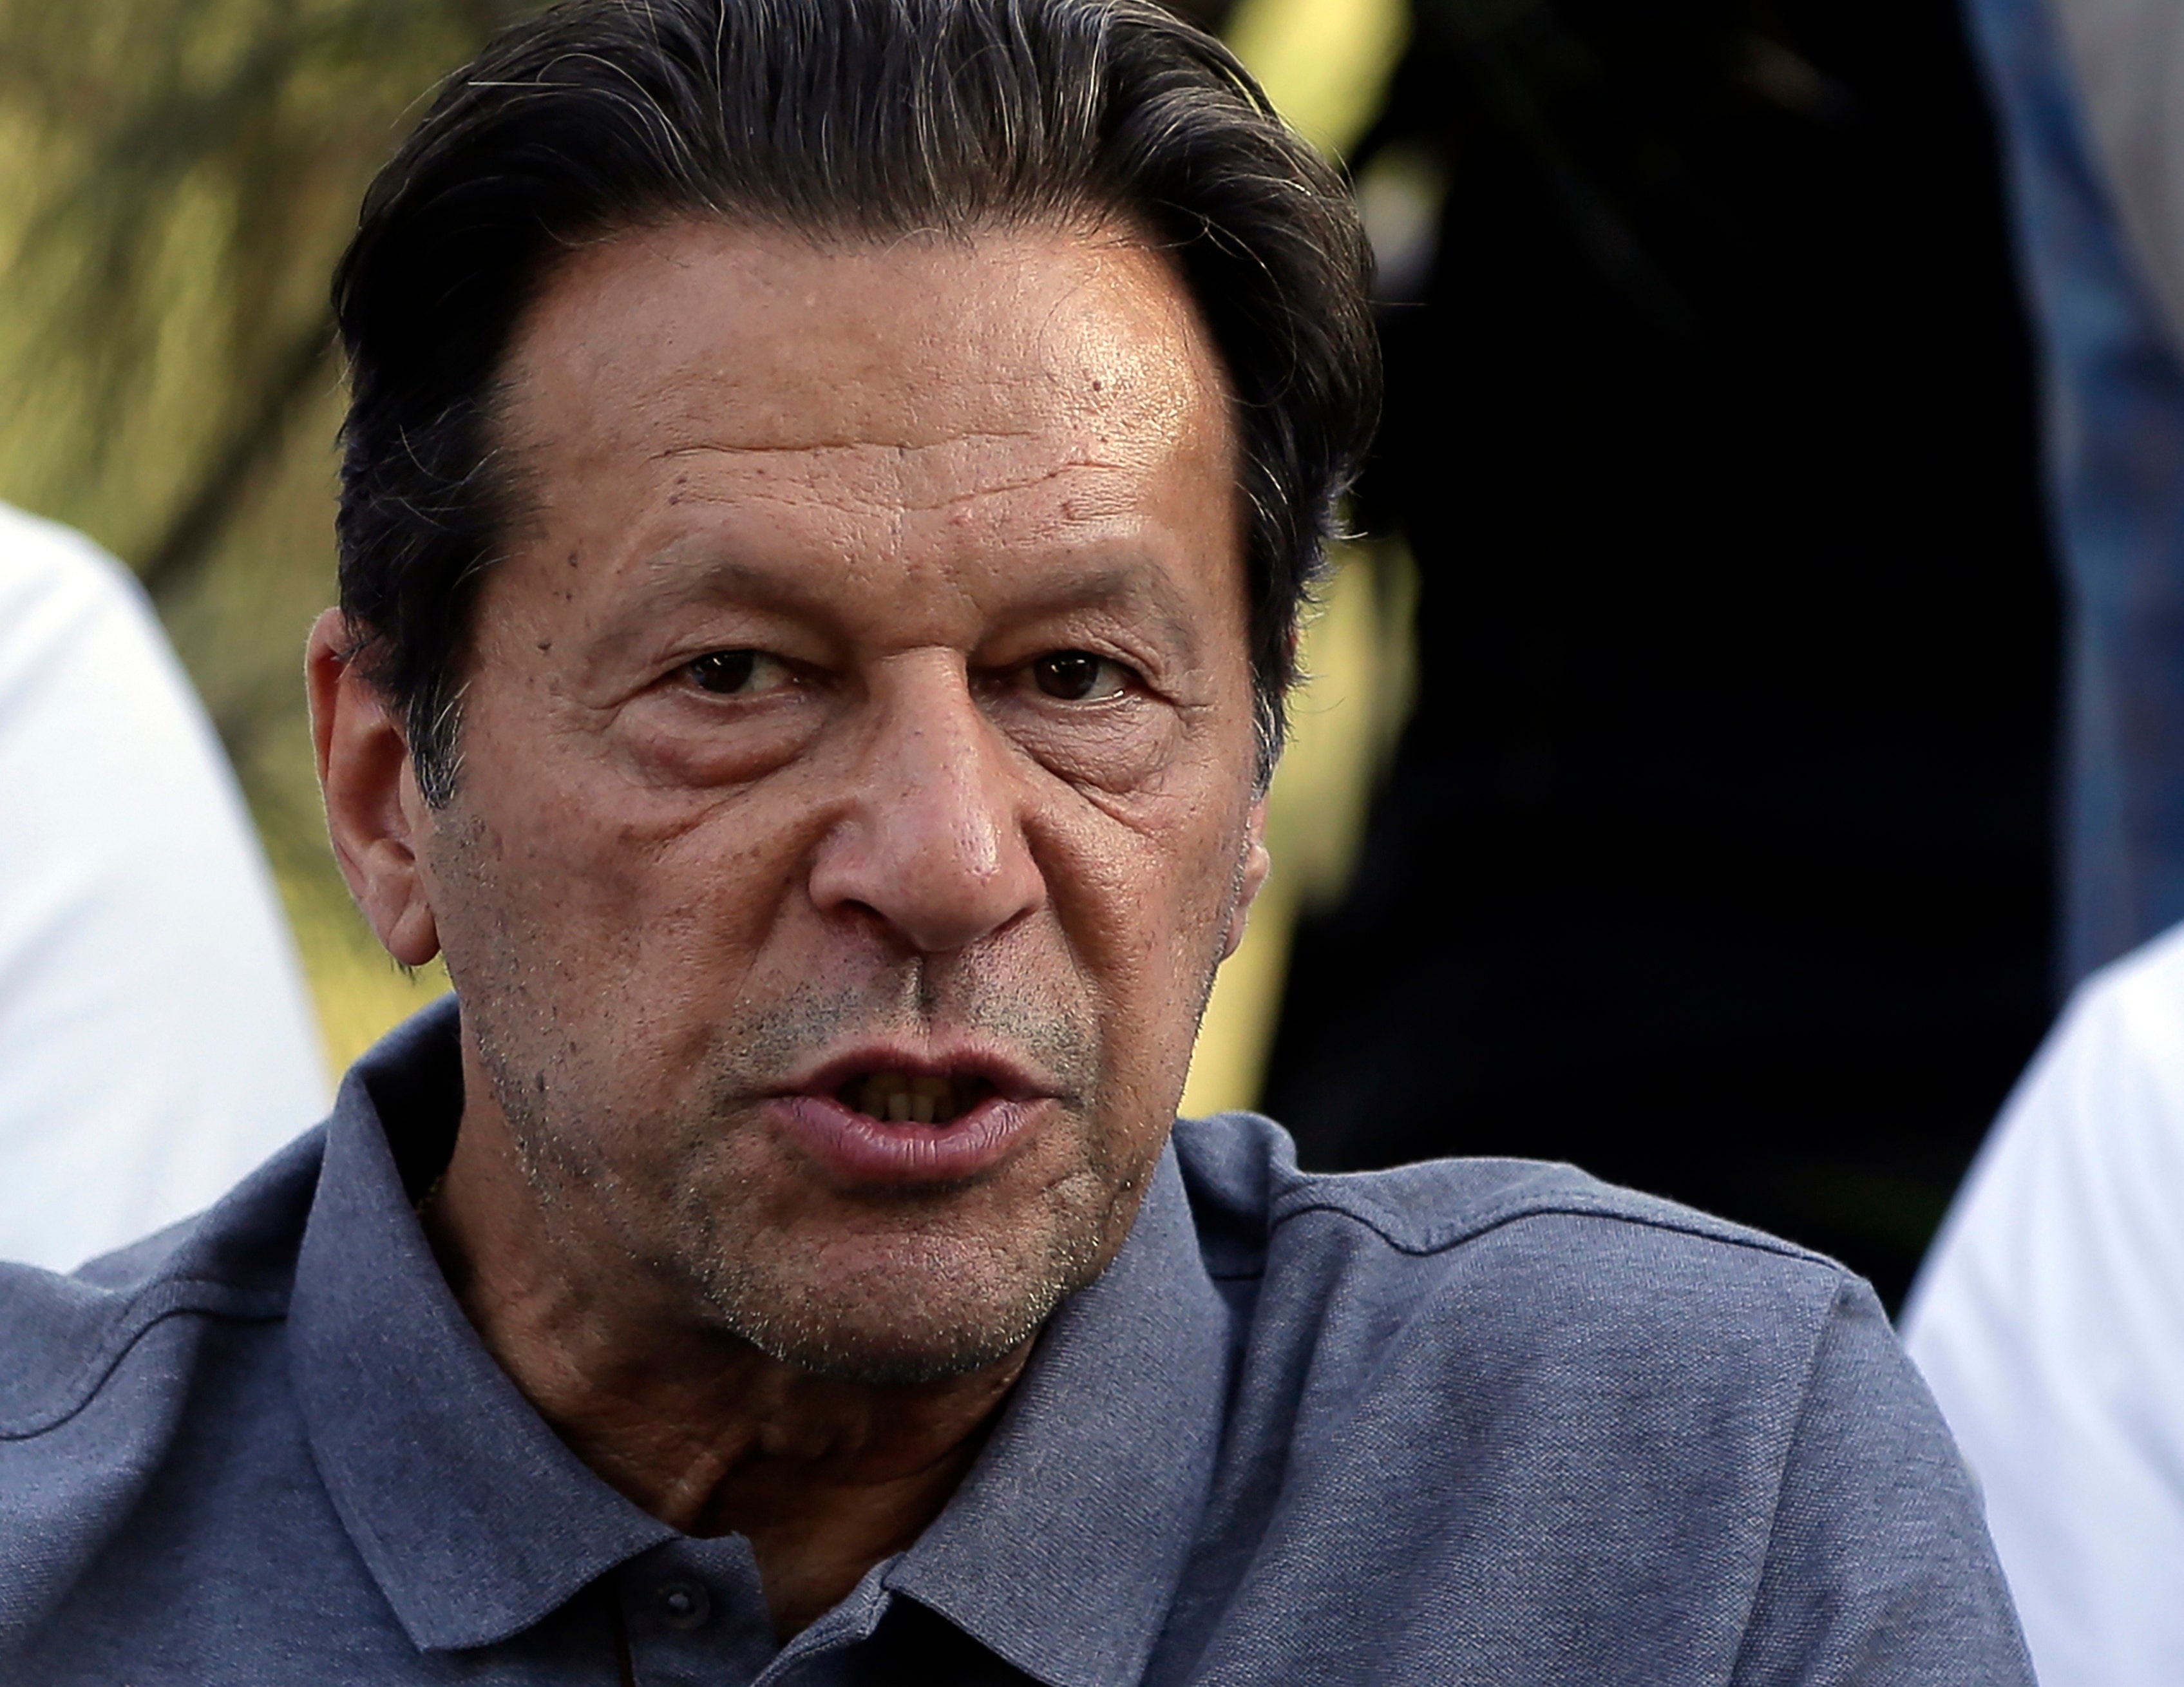 Former Pakistan Prime Minister Imran Khan wounded in gun attack: official